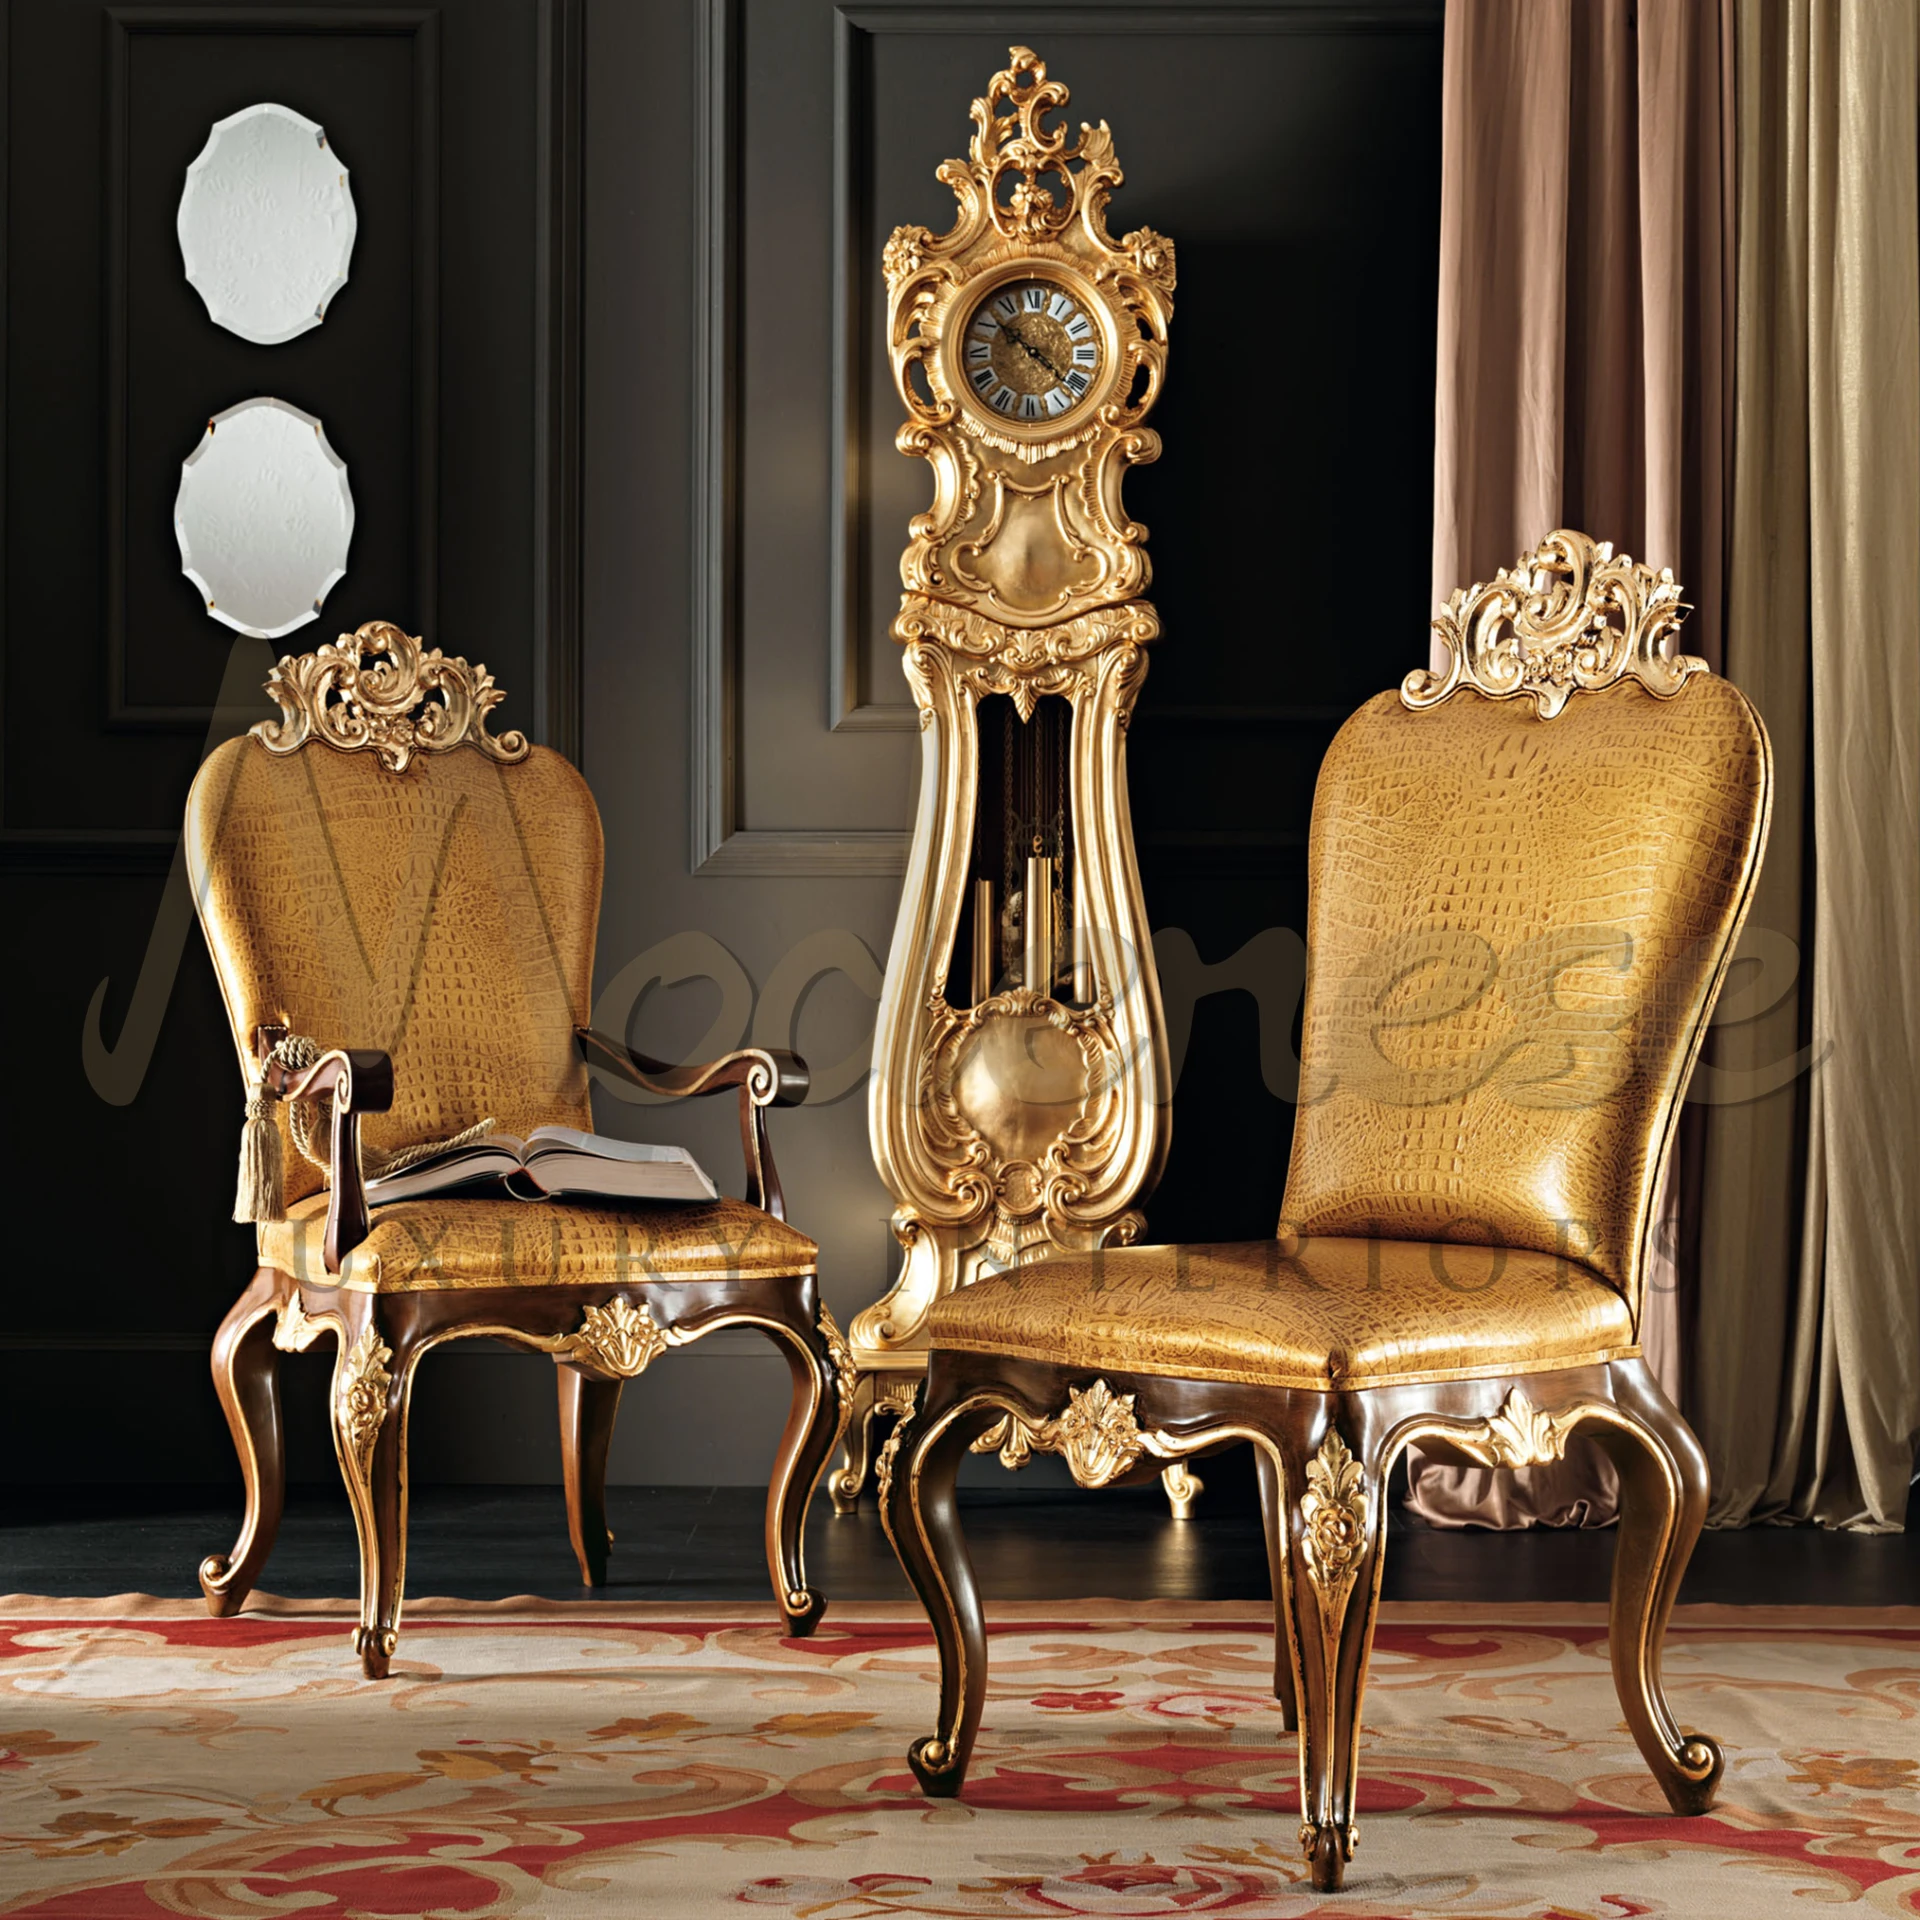 Exclusive design Gold Grandfather Clock, a symbol of luxury by Modenese